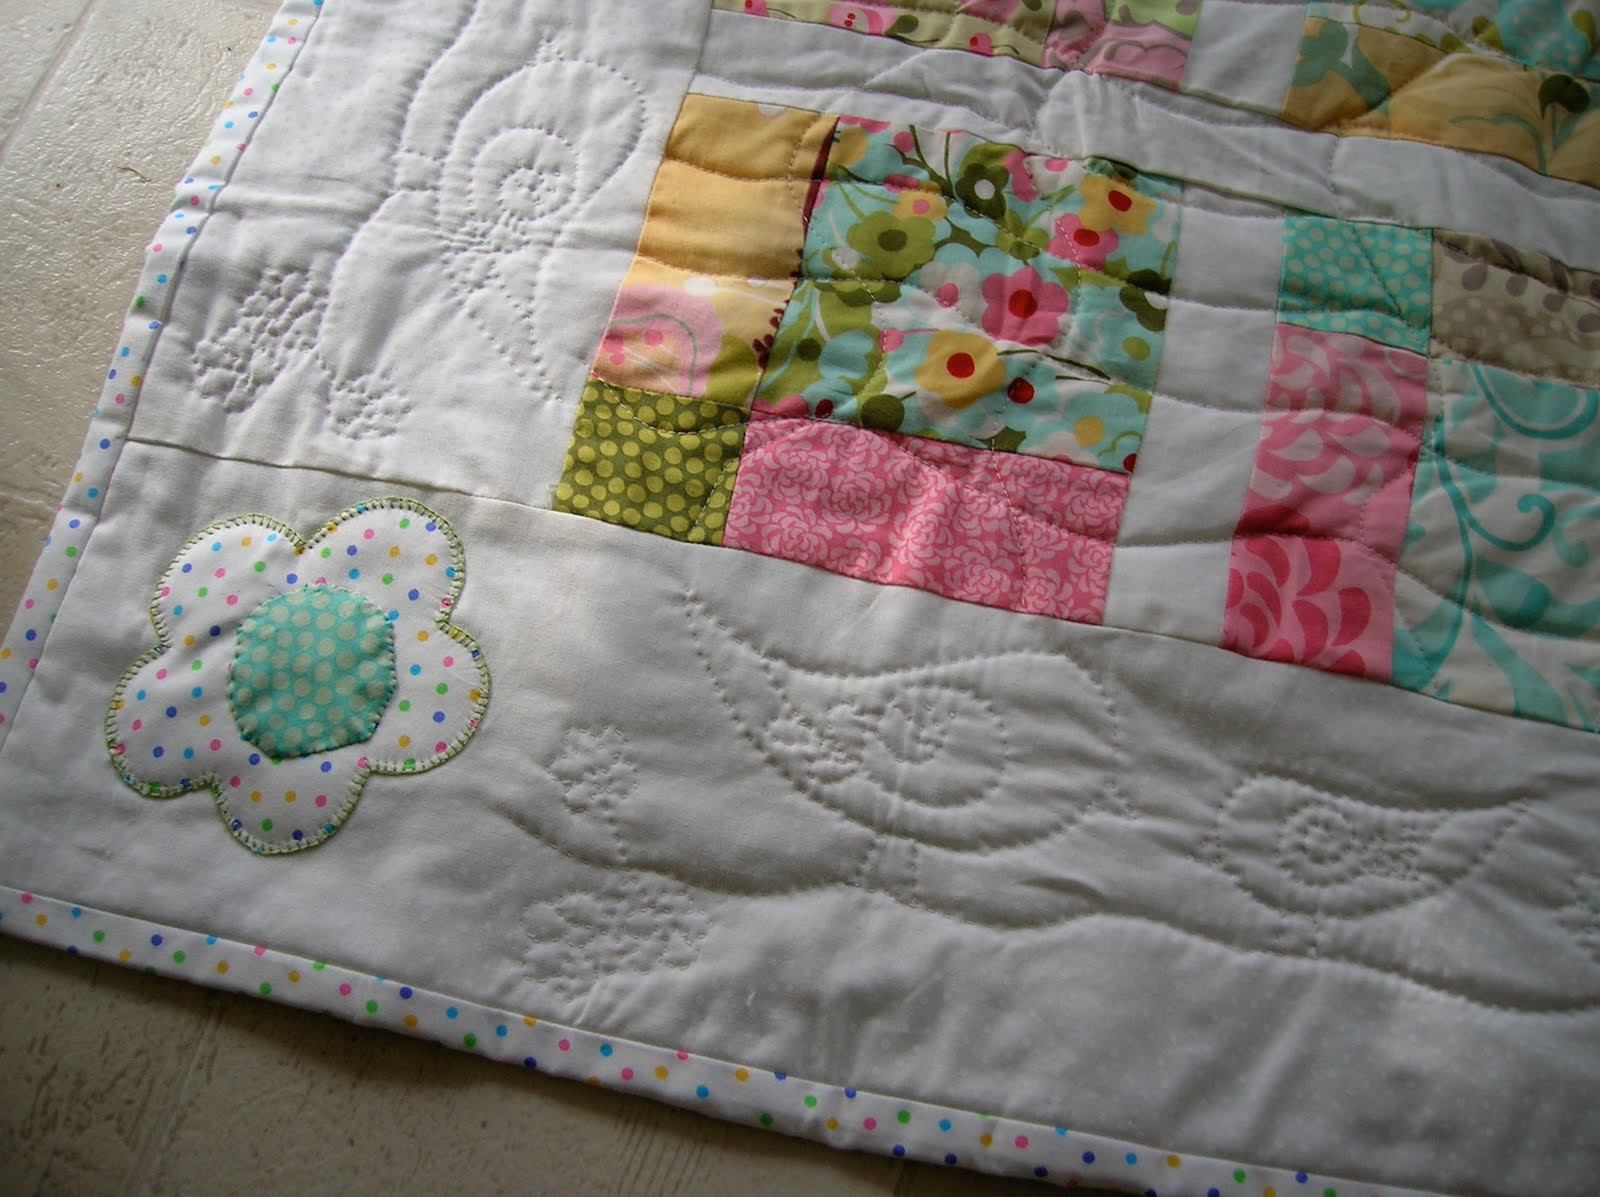 Embroidery Quilt Patterns Hand Embroidery Quilting Free Embroidery Patterns Solid Bedspreads